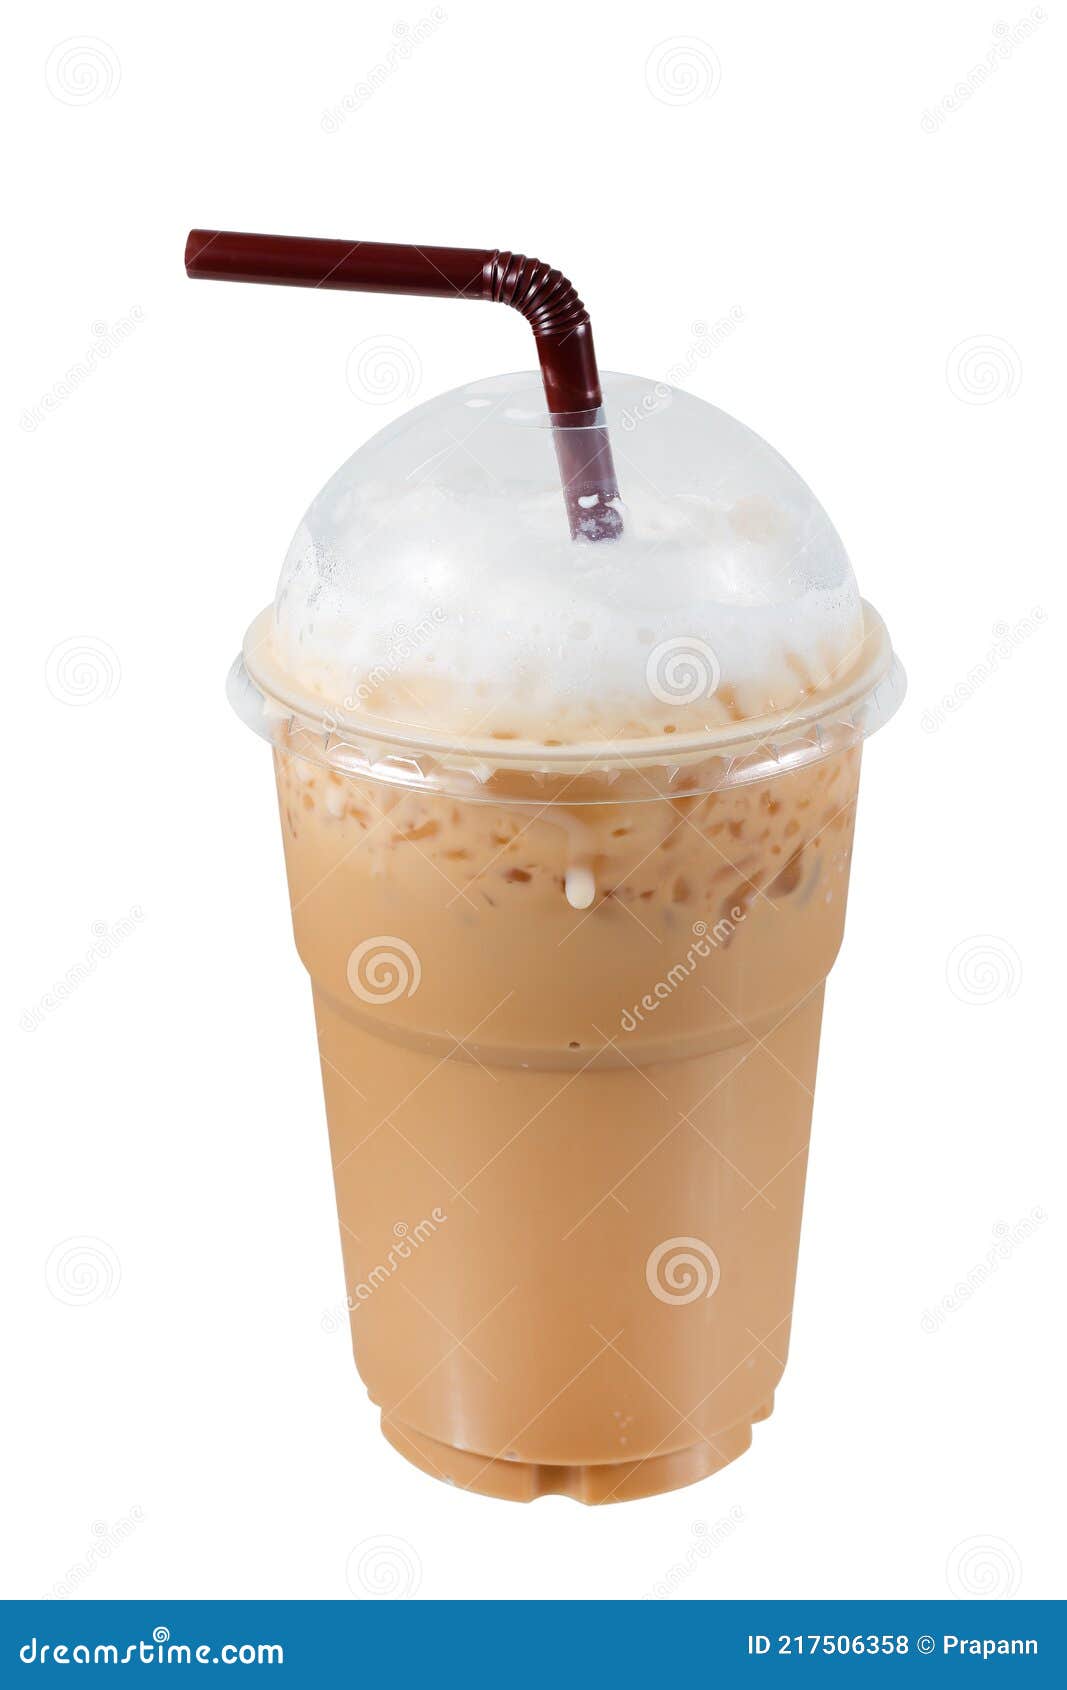 https://thumbs.dreamstime.com/z/iced-coffee-plastic-cup-isolated-white-background-217506358.jpg